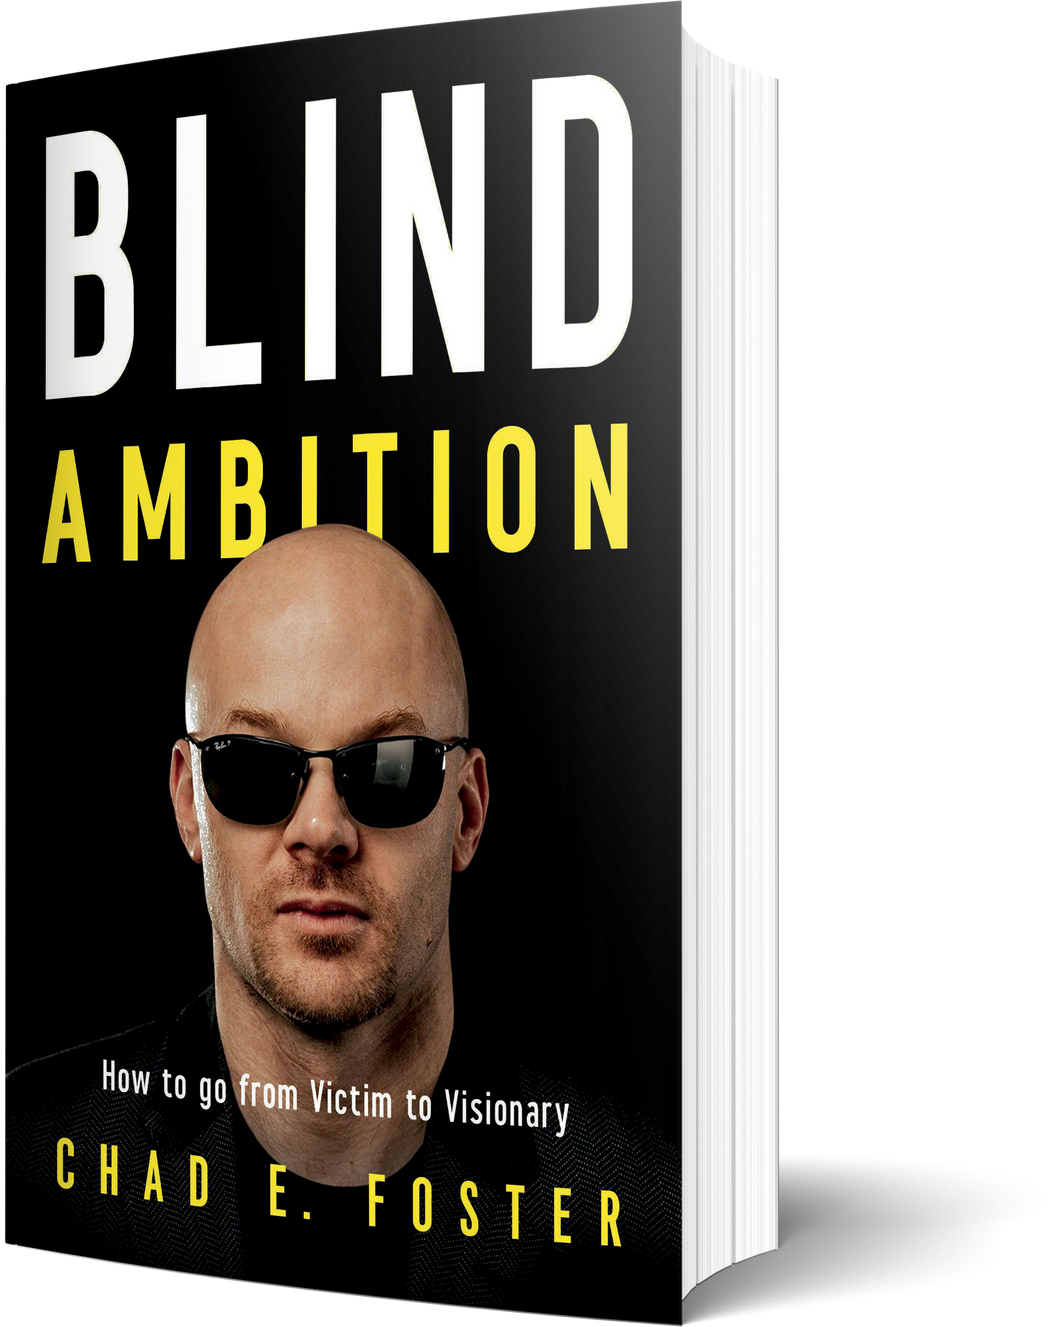 Signed Hardcover of Blind Ambition: How to Go from Victim to Visionary